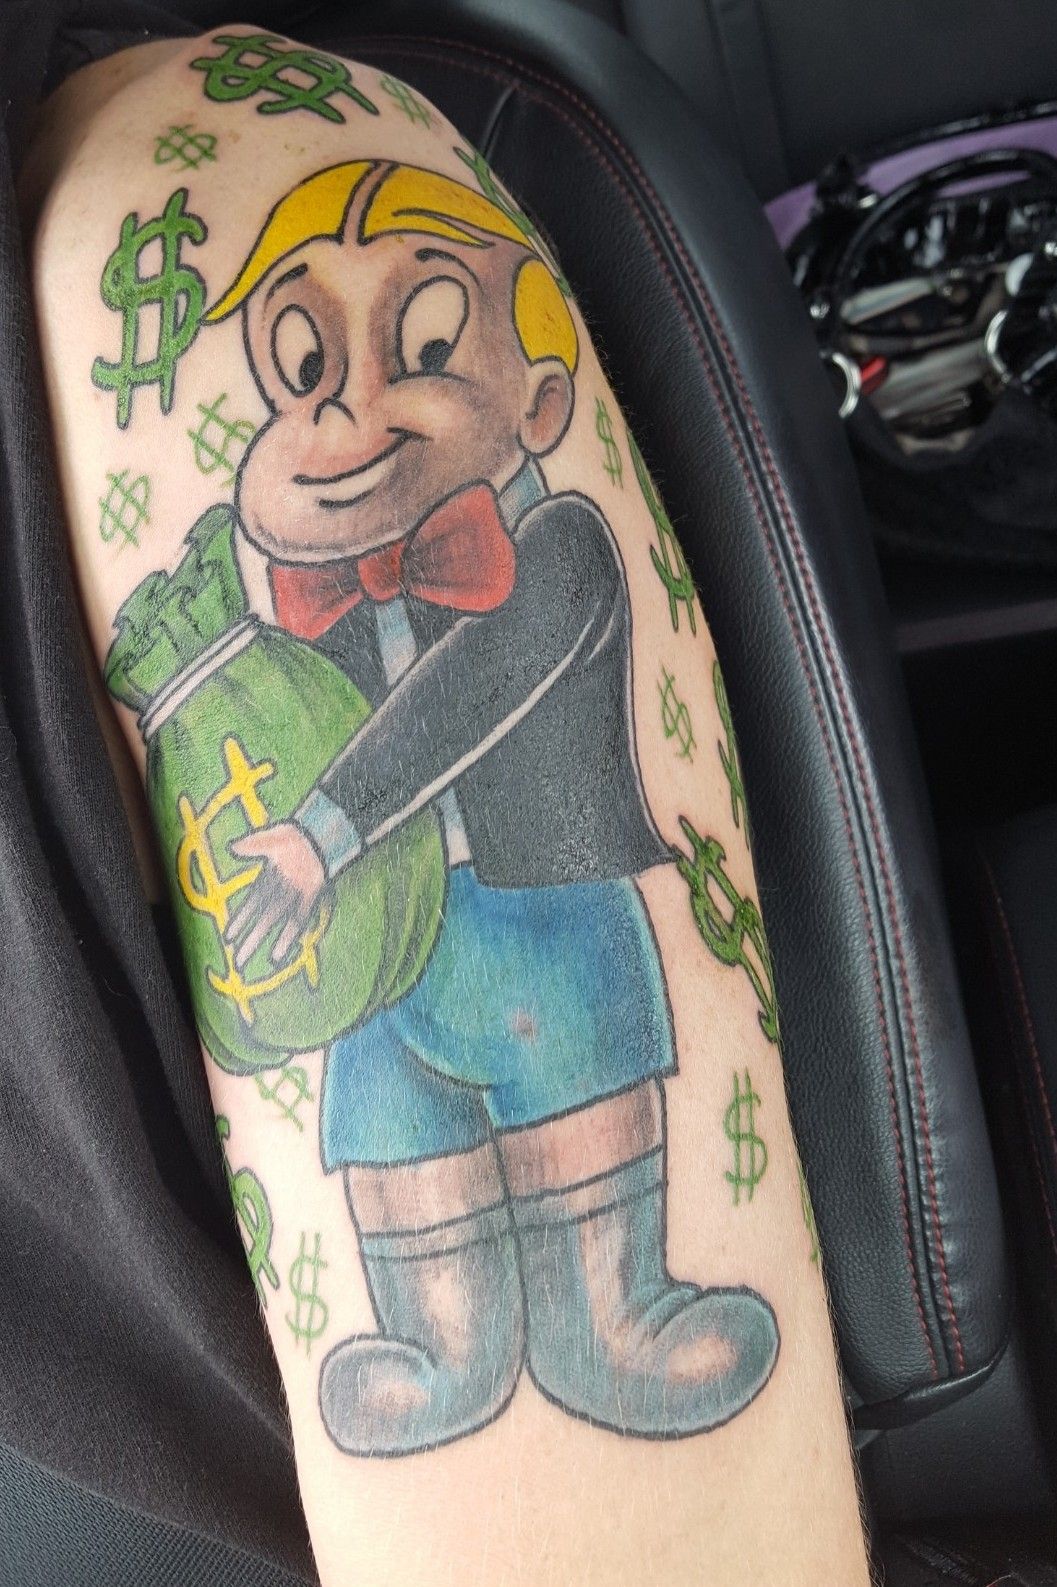 Evil Twin Tattoo and ArtLas Vegas NV  As Richie Rich always said  Green for the money and gold for the honeys or something close to  that cool Rich tattoo by Vamps 